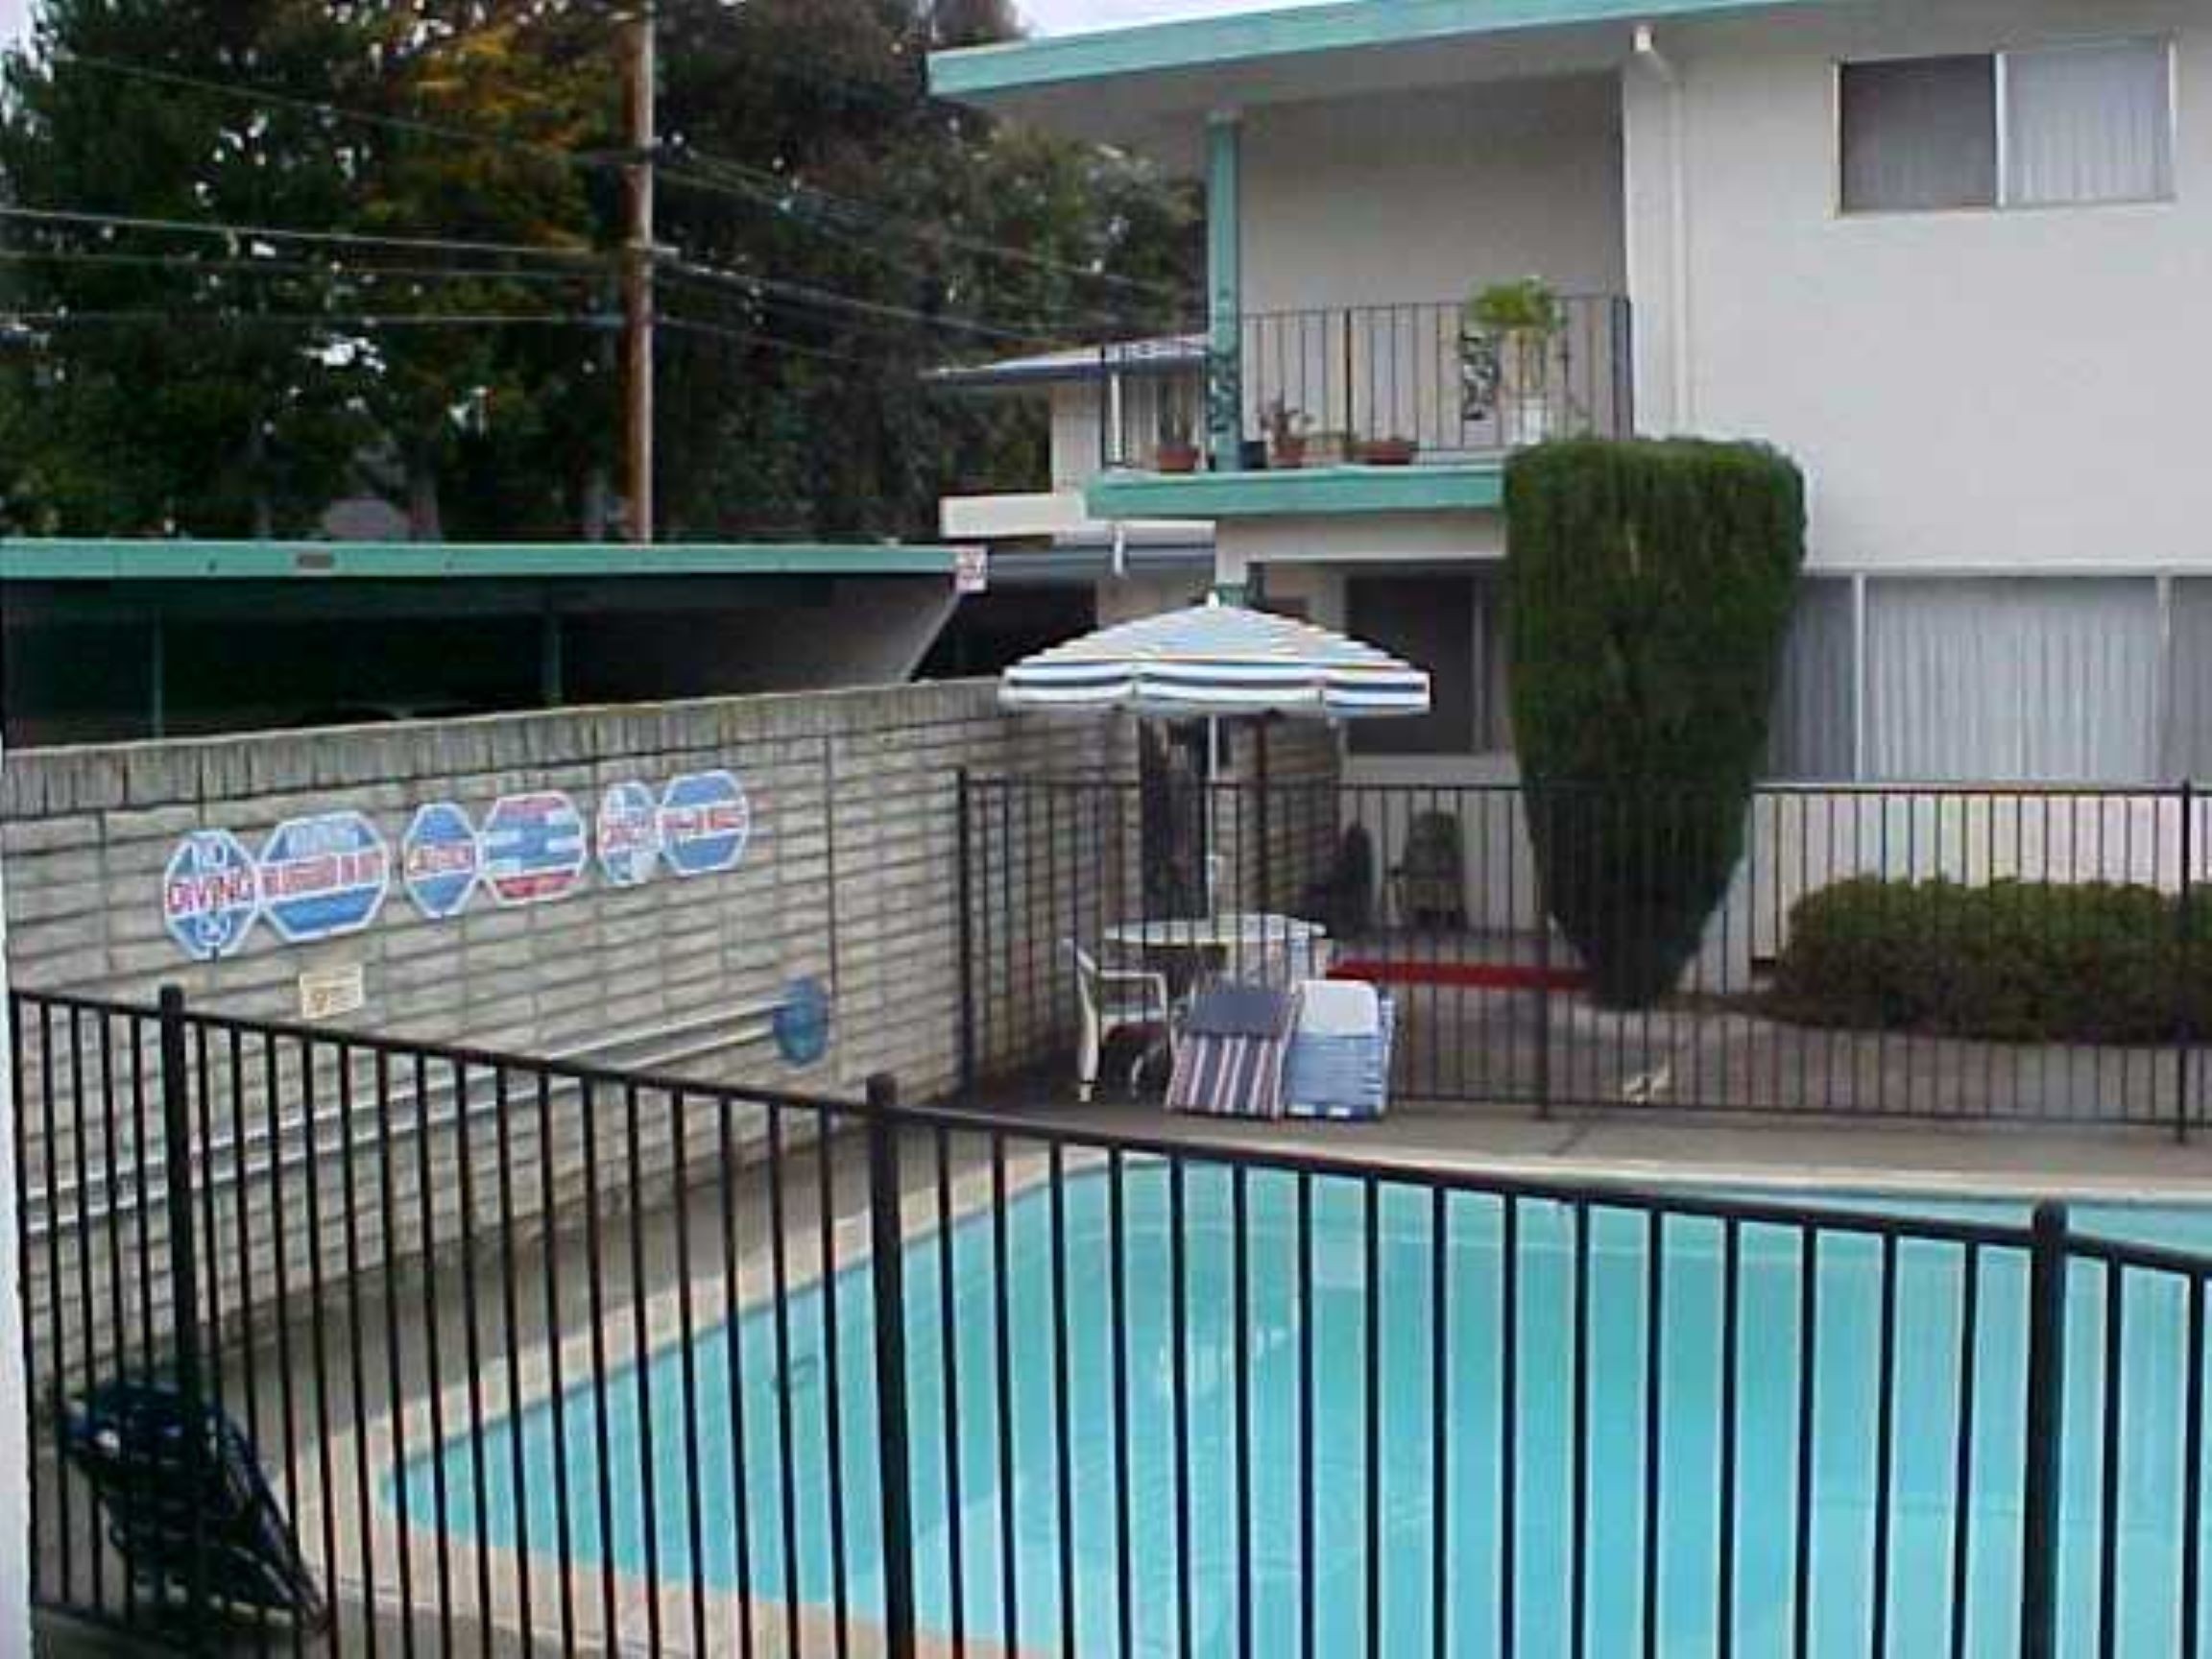 A pool with an umbrella and chairs in the back yard.